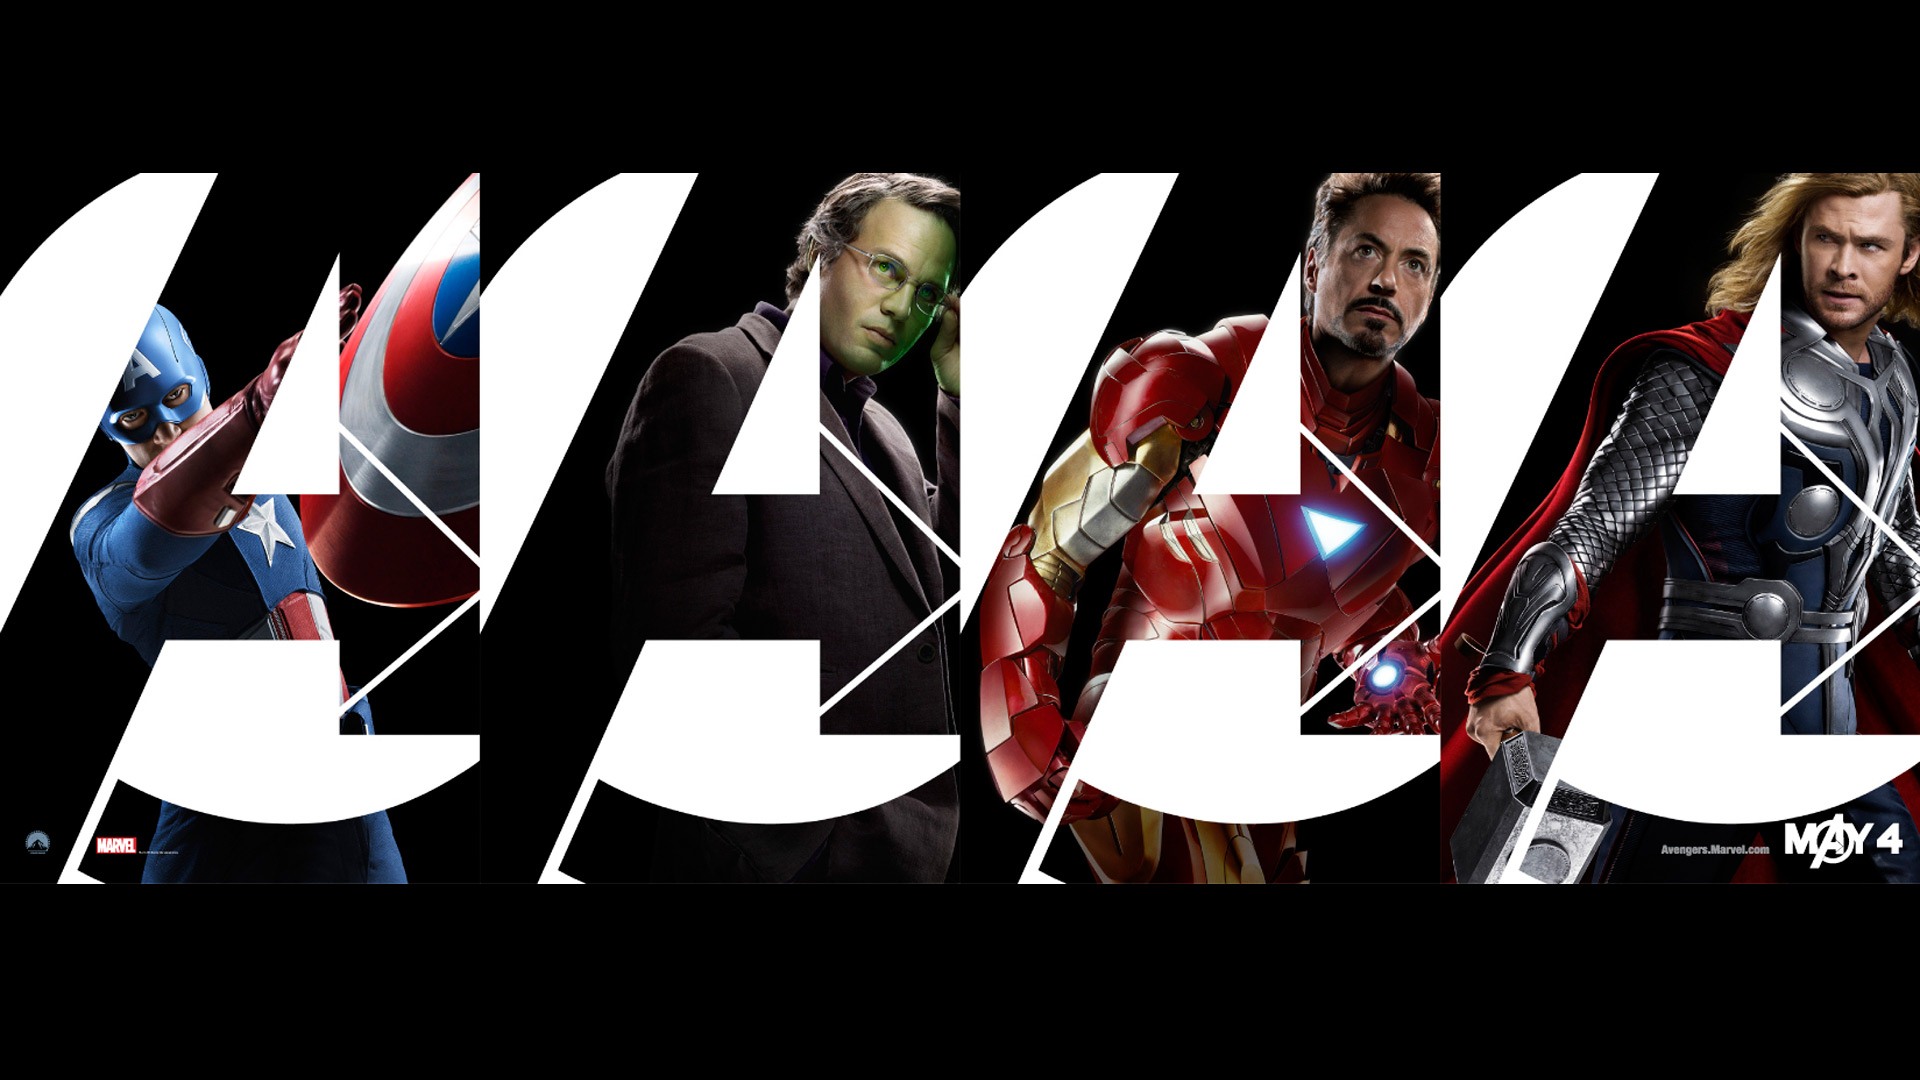 The Avengers 2012 HD wallpapers #9 - 1920x1080